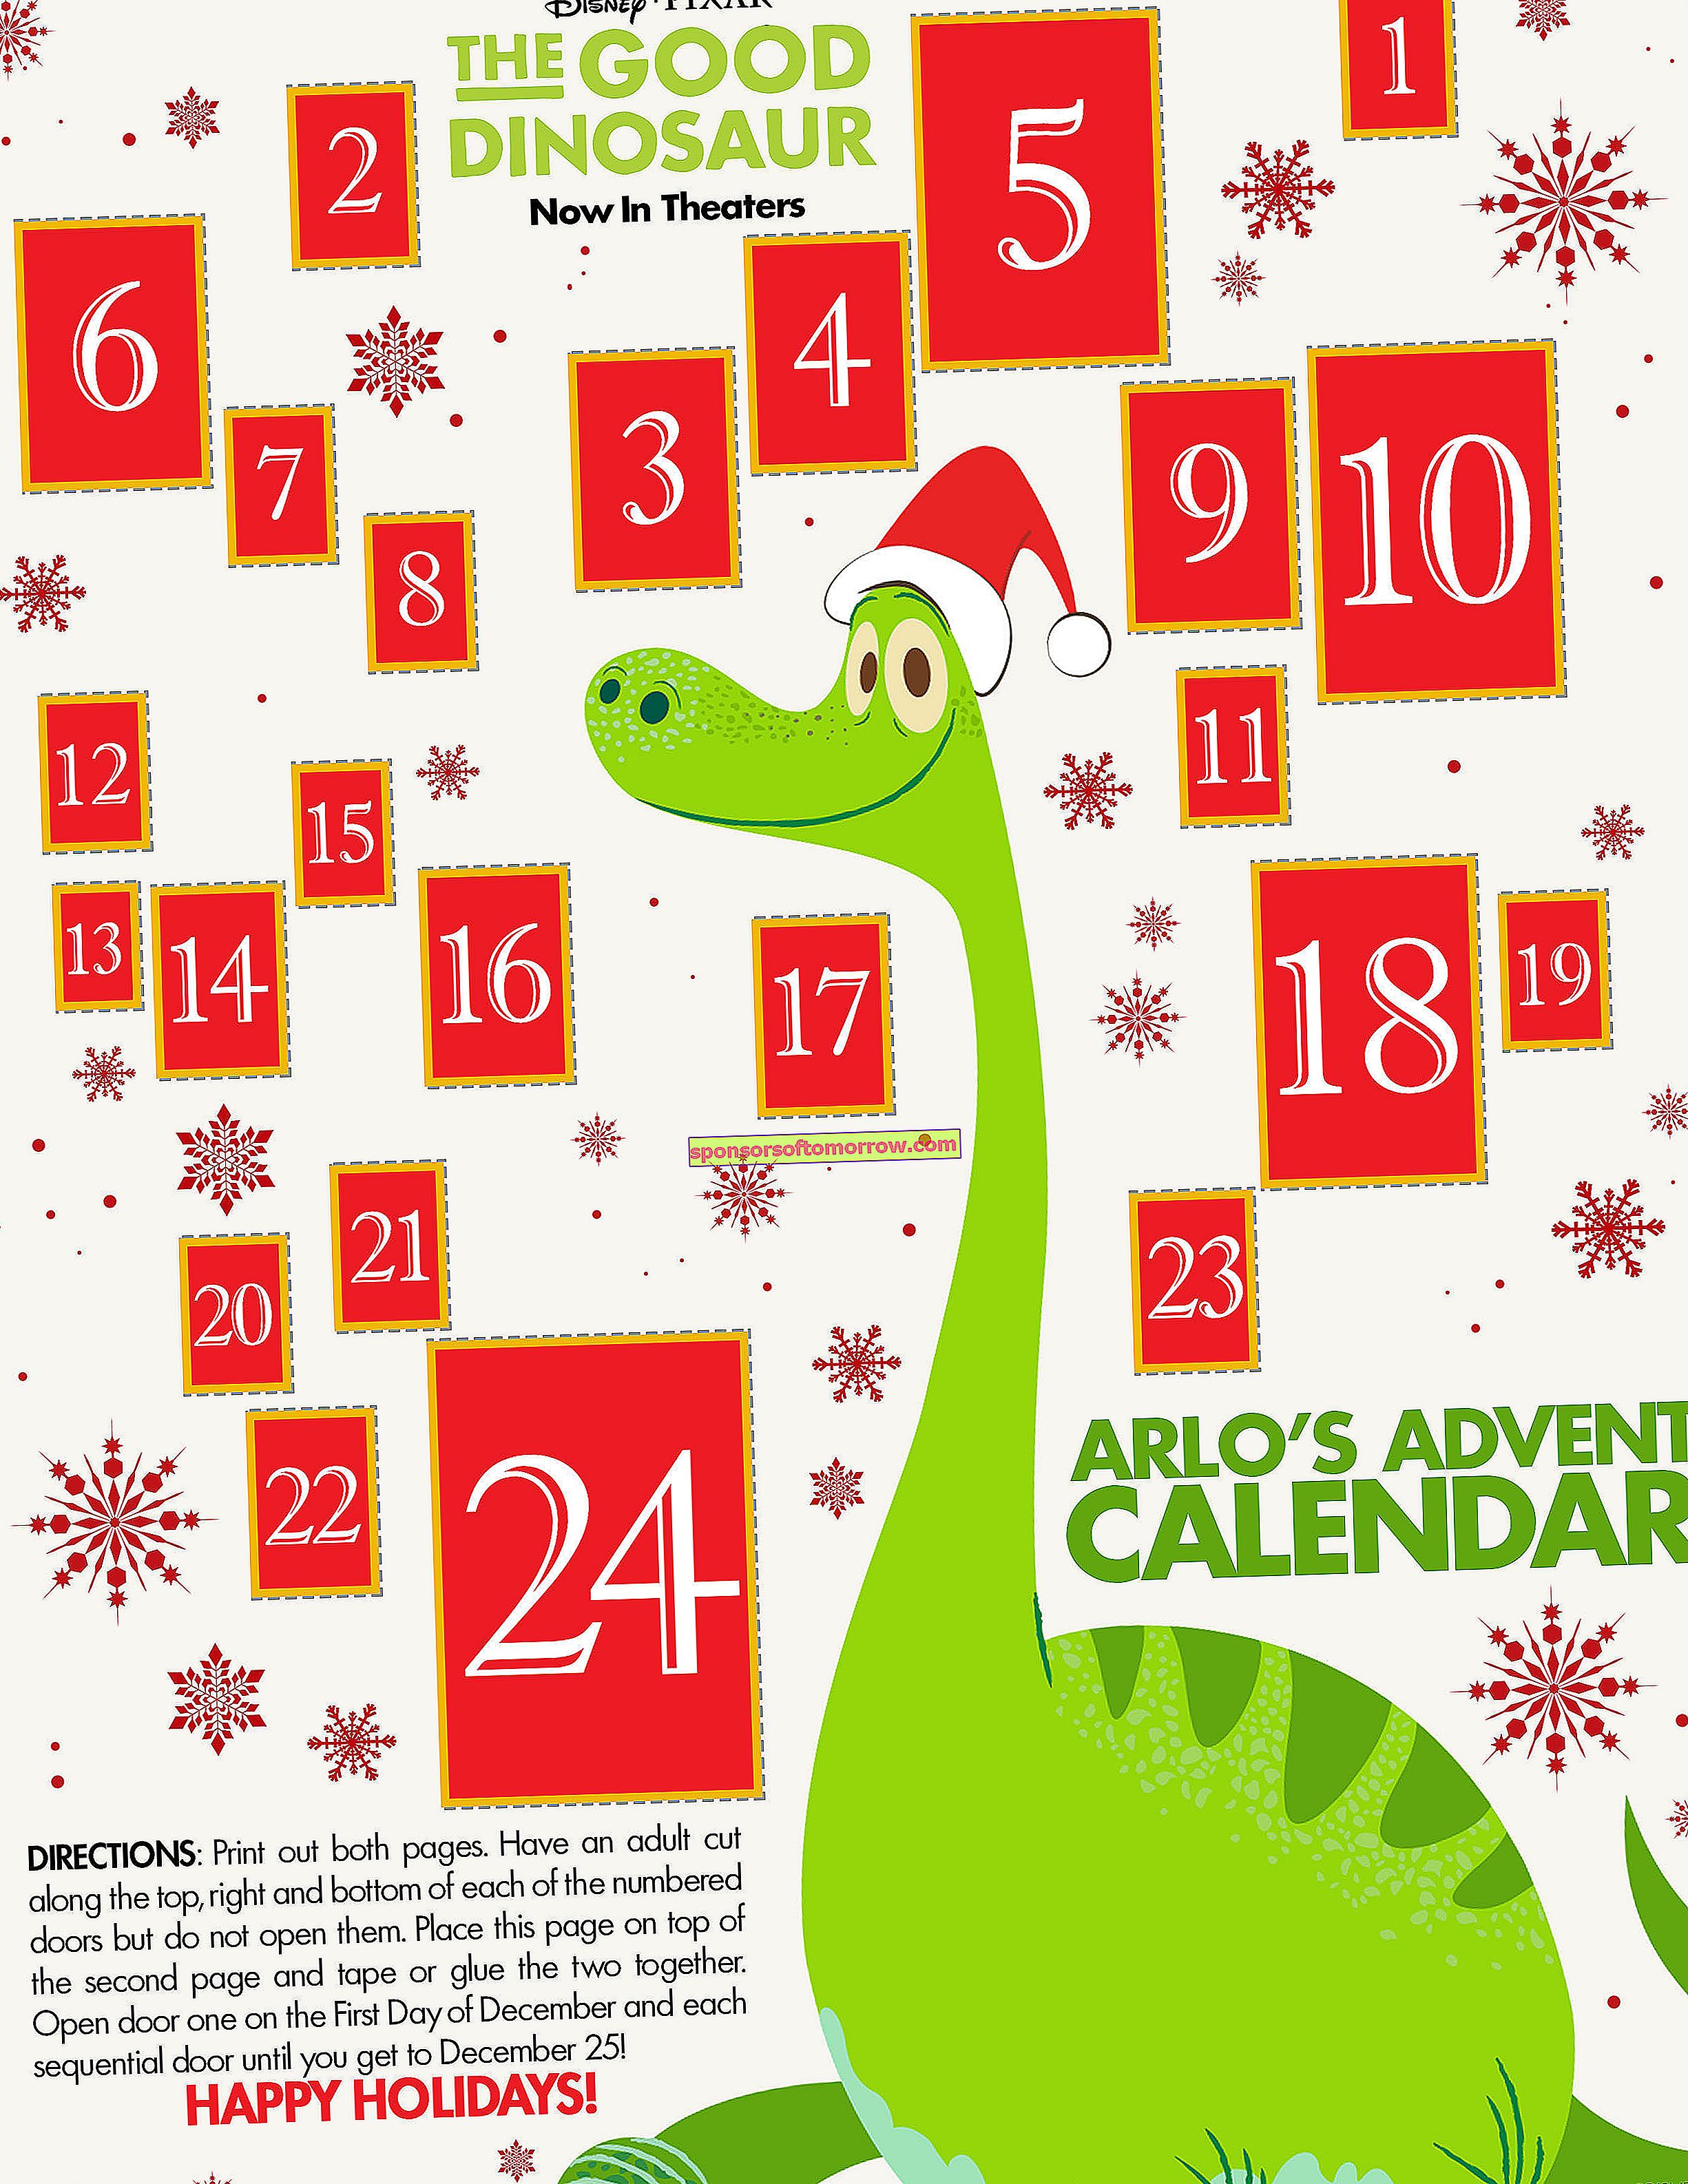 10 beautiful advent calendar images to download and print 18